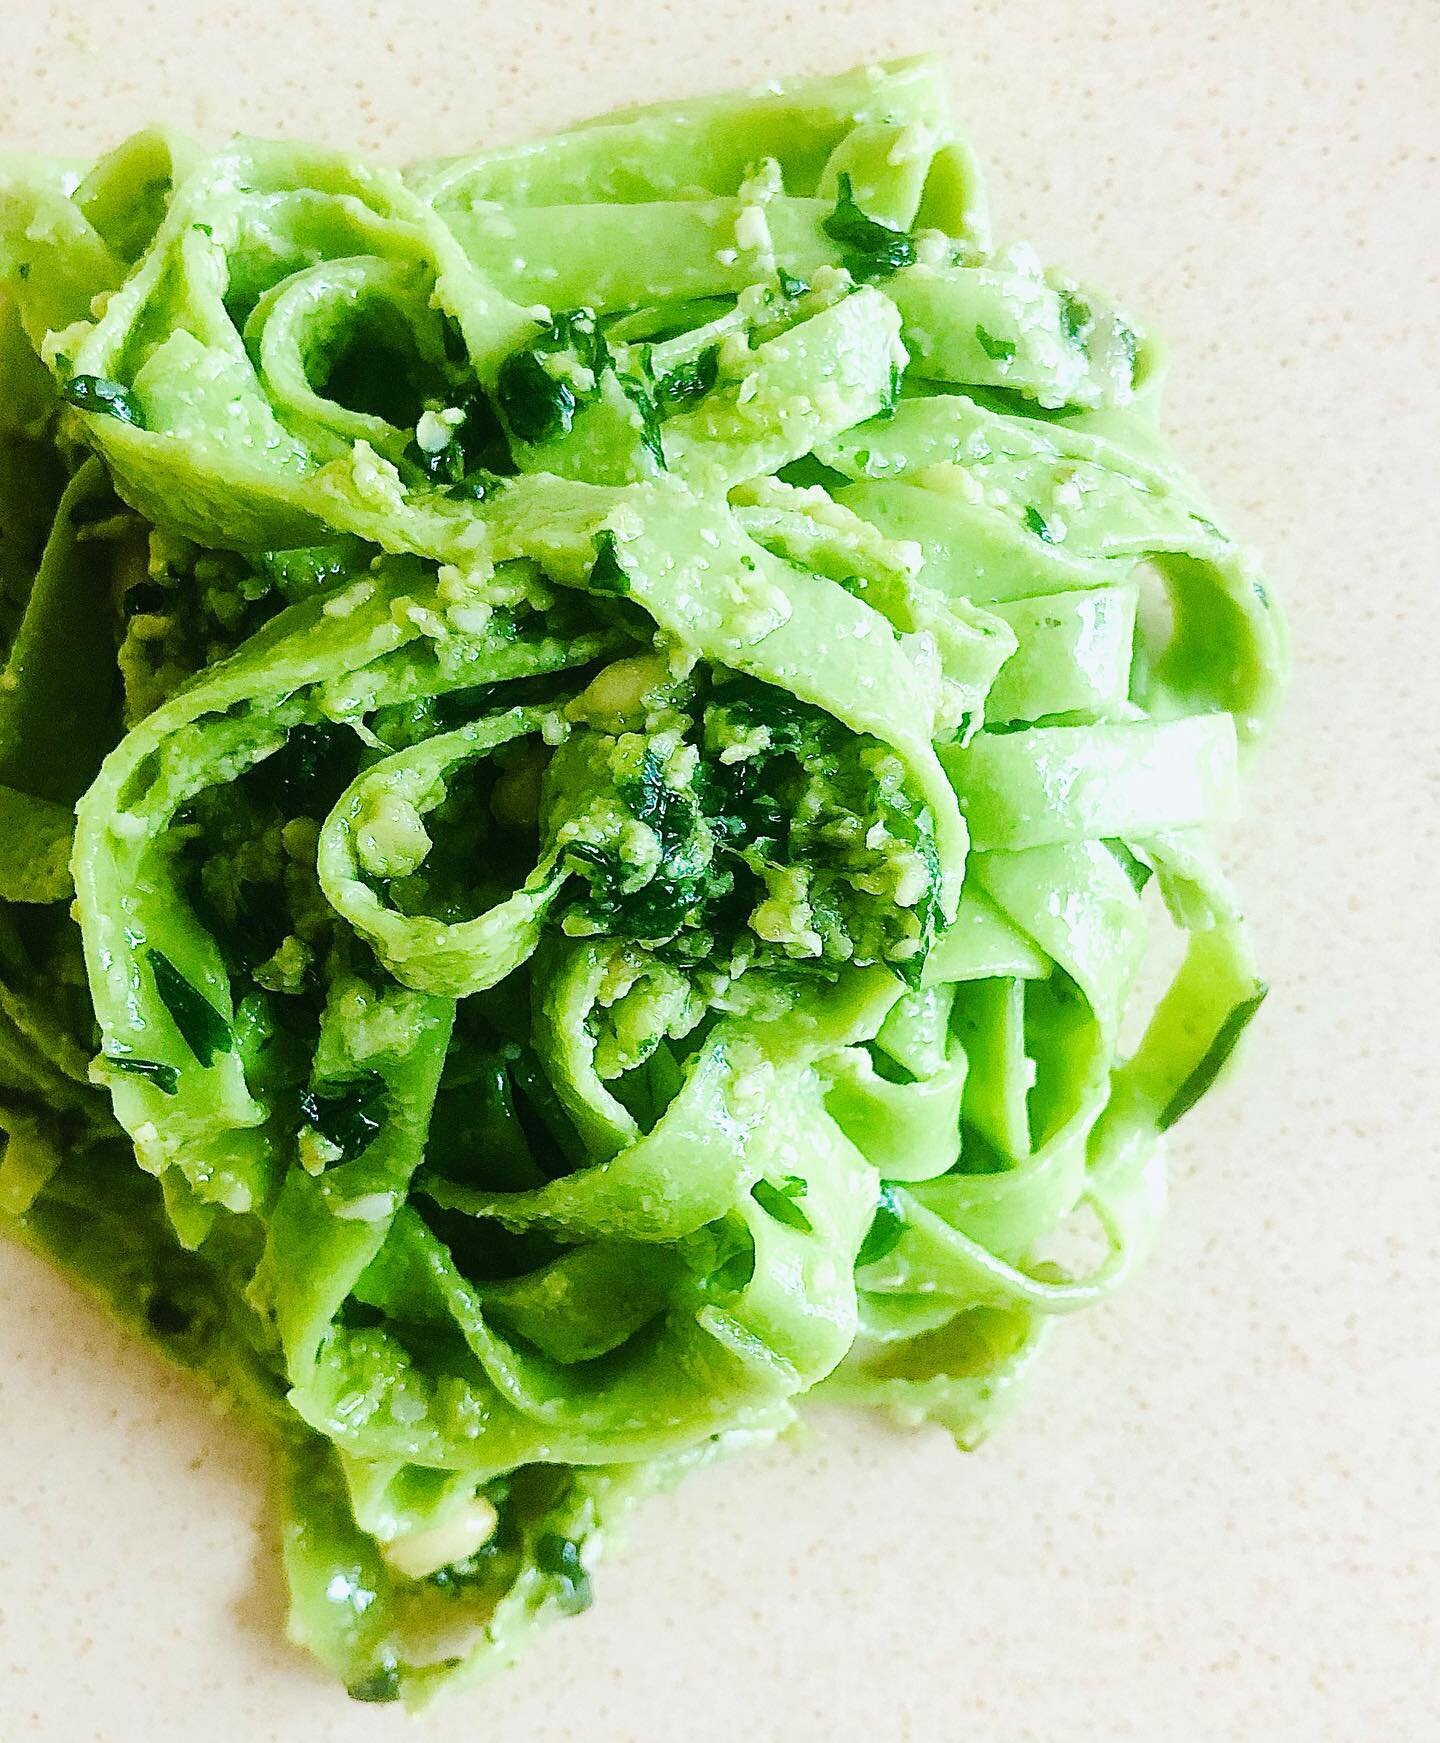 I want to clear up some confusion about pesto quickly. Pesto means to pound or to crush. It&rsquo;s a verb really. So lots of things can be pesto. Pesto alla Genovese ~ pesto from Genoa ~ is the gorgeous green pesto many of us think of when we first 